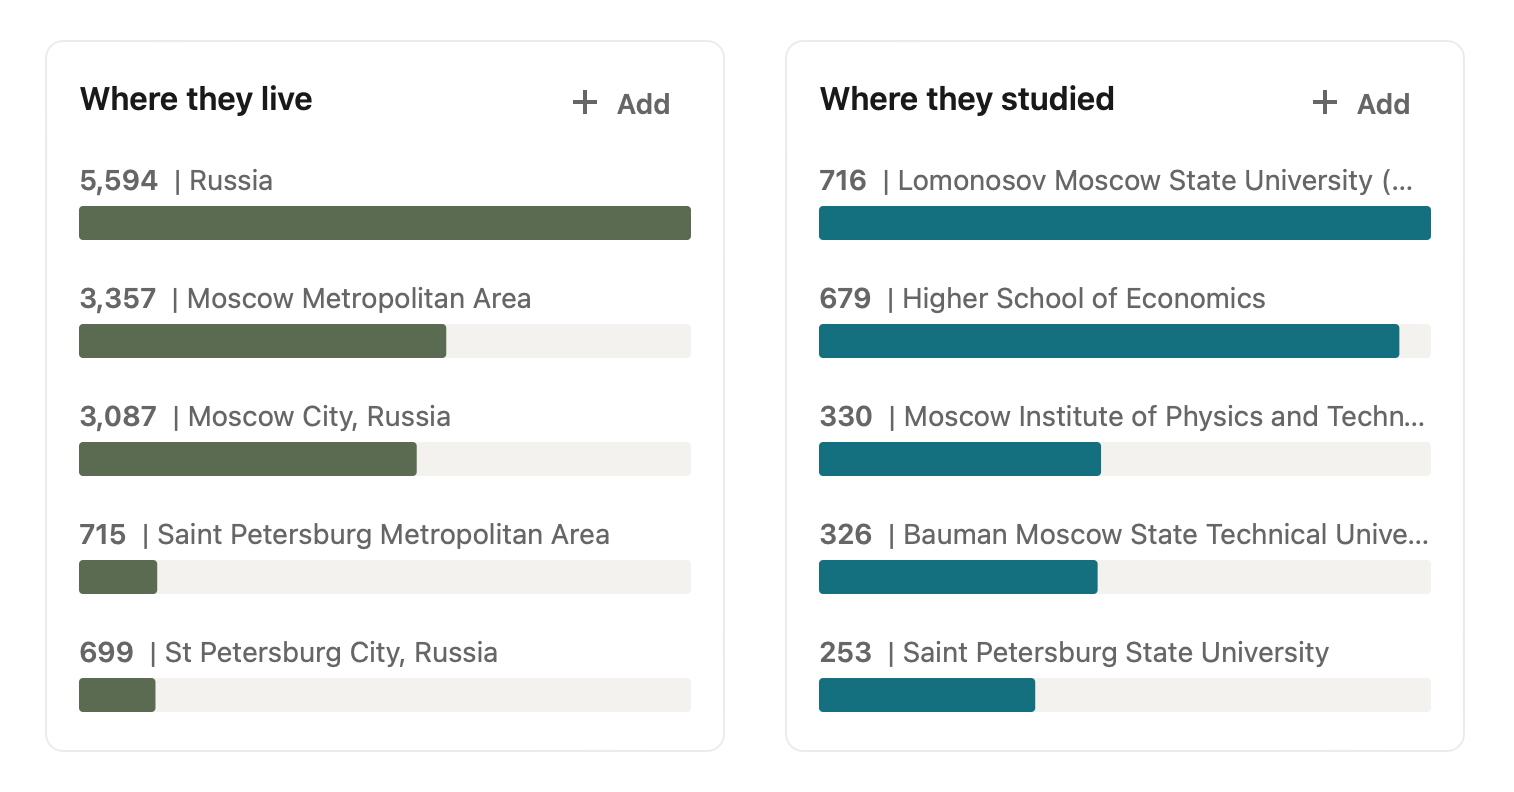 Analyzing Russian Internet Firm Yandex, Its Open-Source Code, and Its Global Contributors